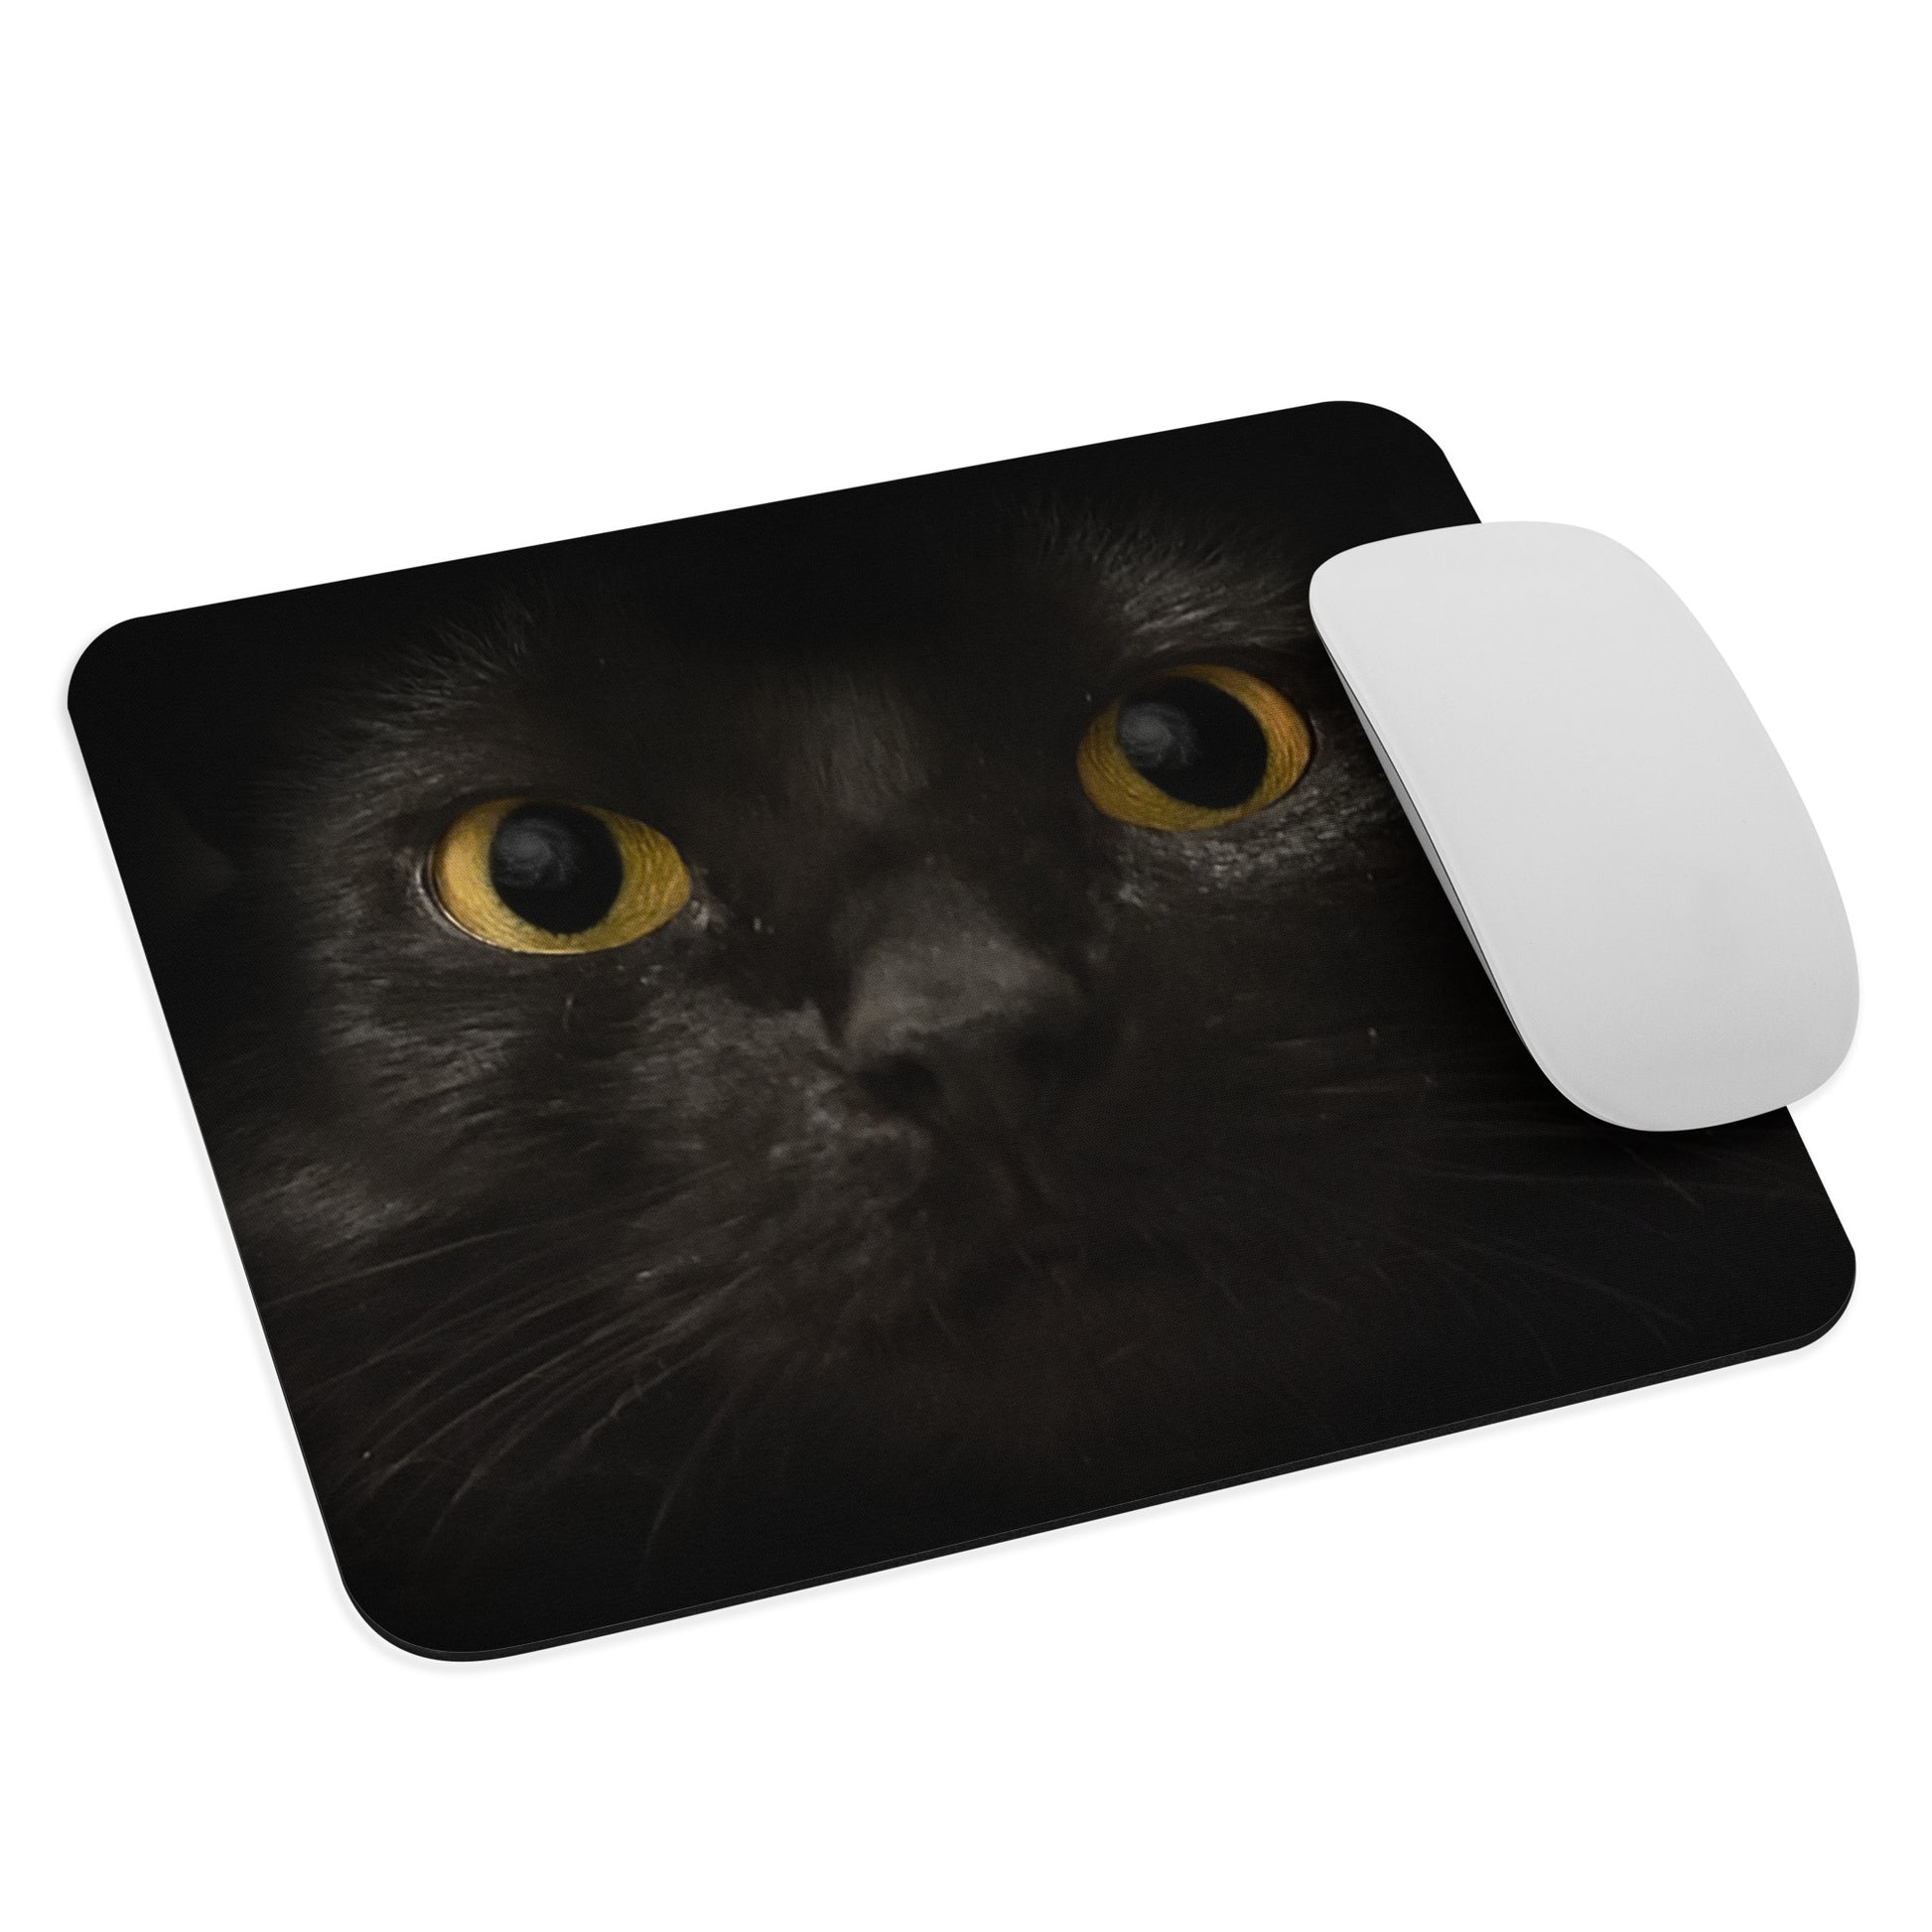 A mouse pad featuring the straight-on face of a black cat with yellow eyes; a galaxy is reflected in her pupils. This mockup includes an Apple mouse for scale.